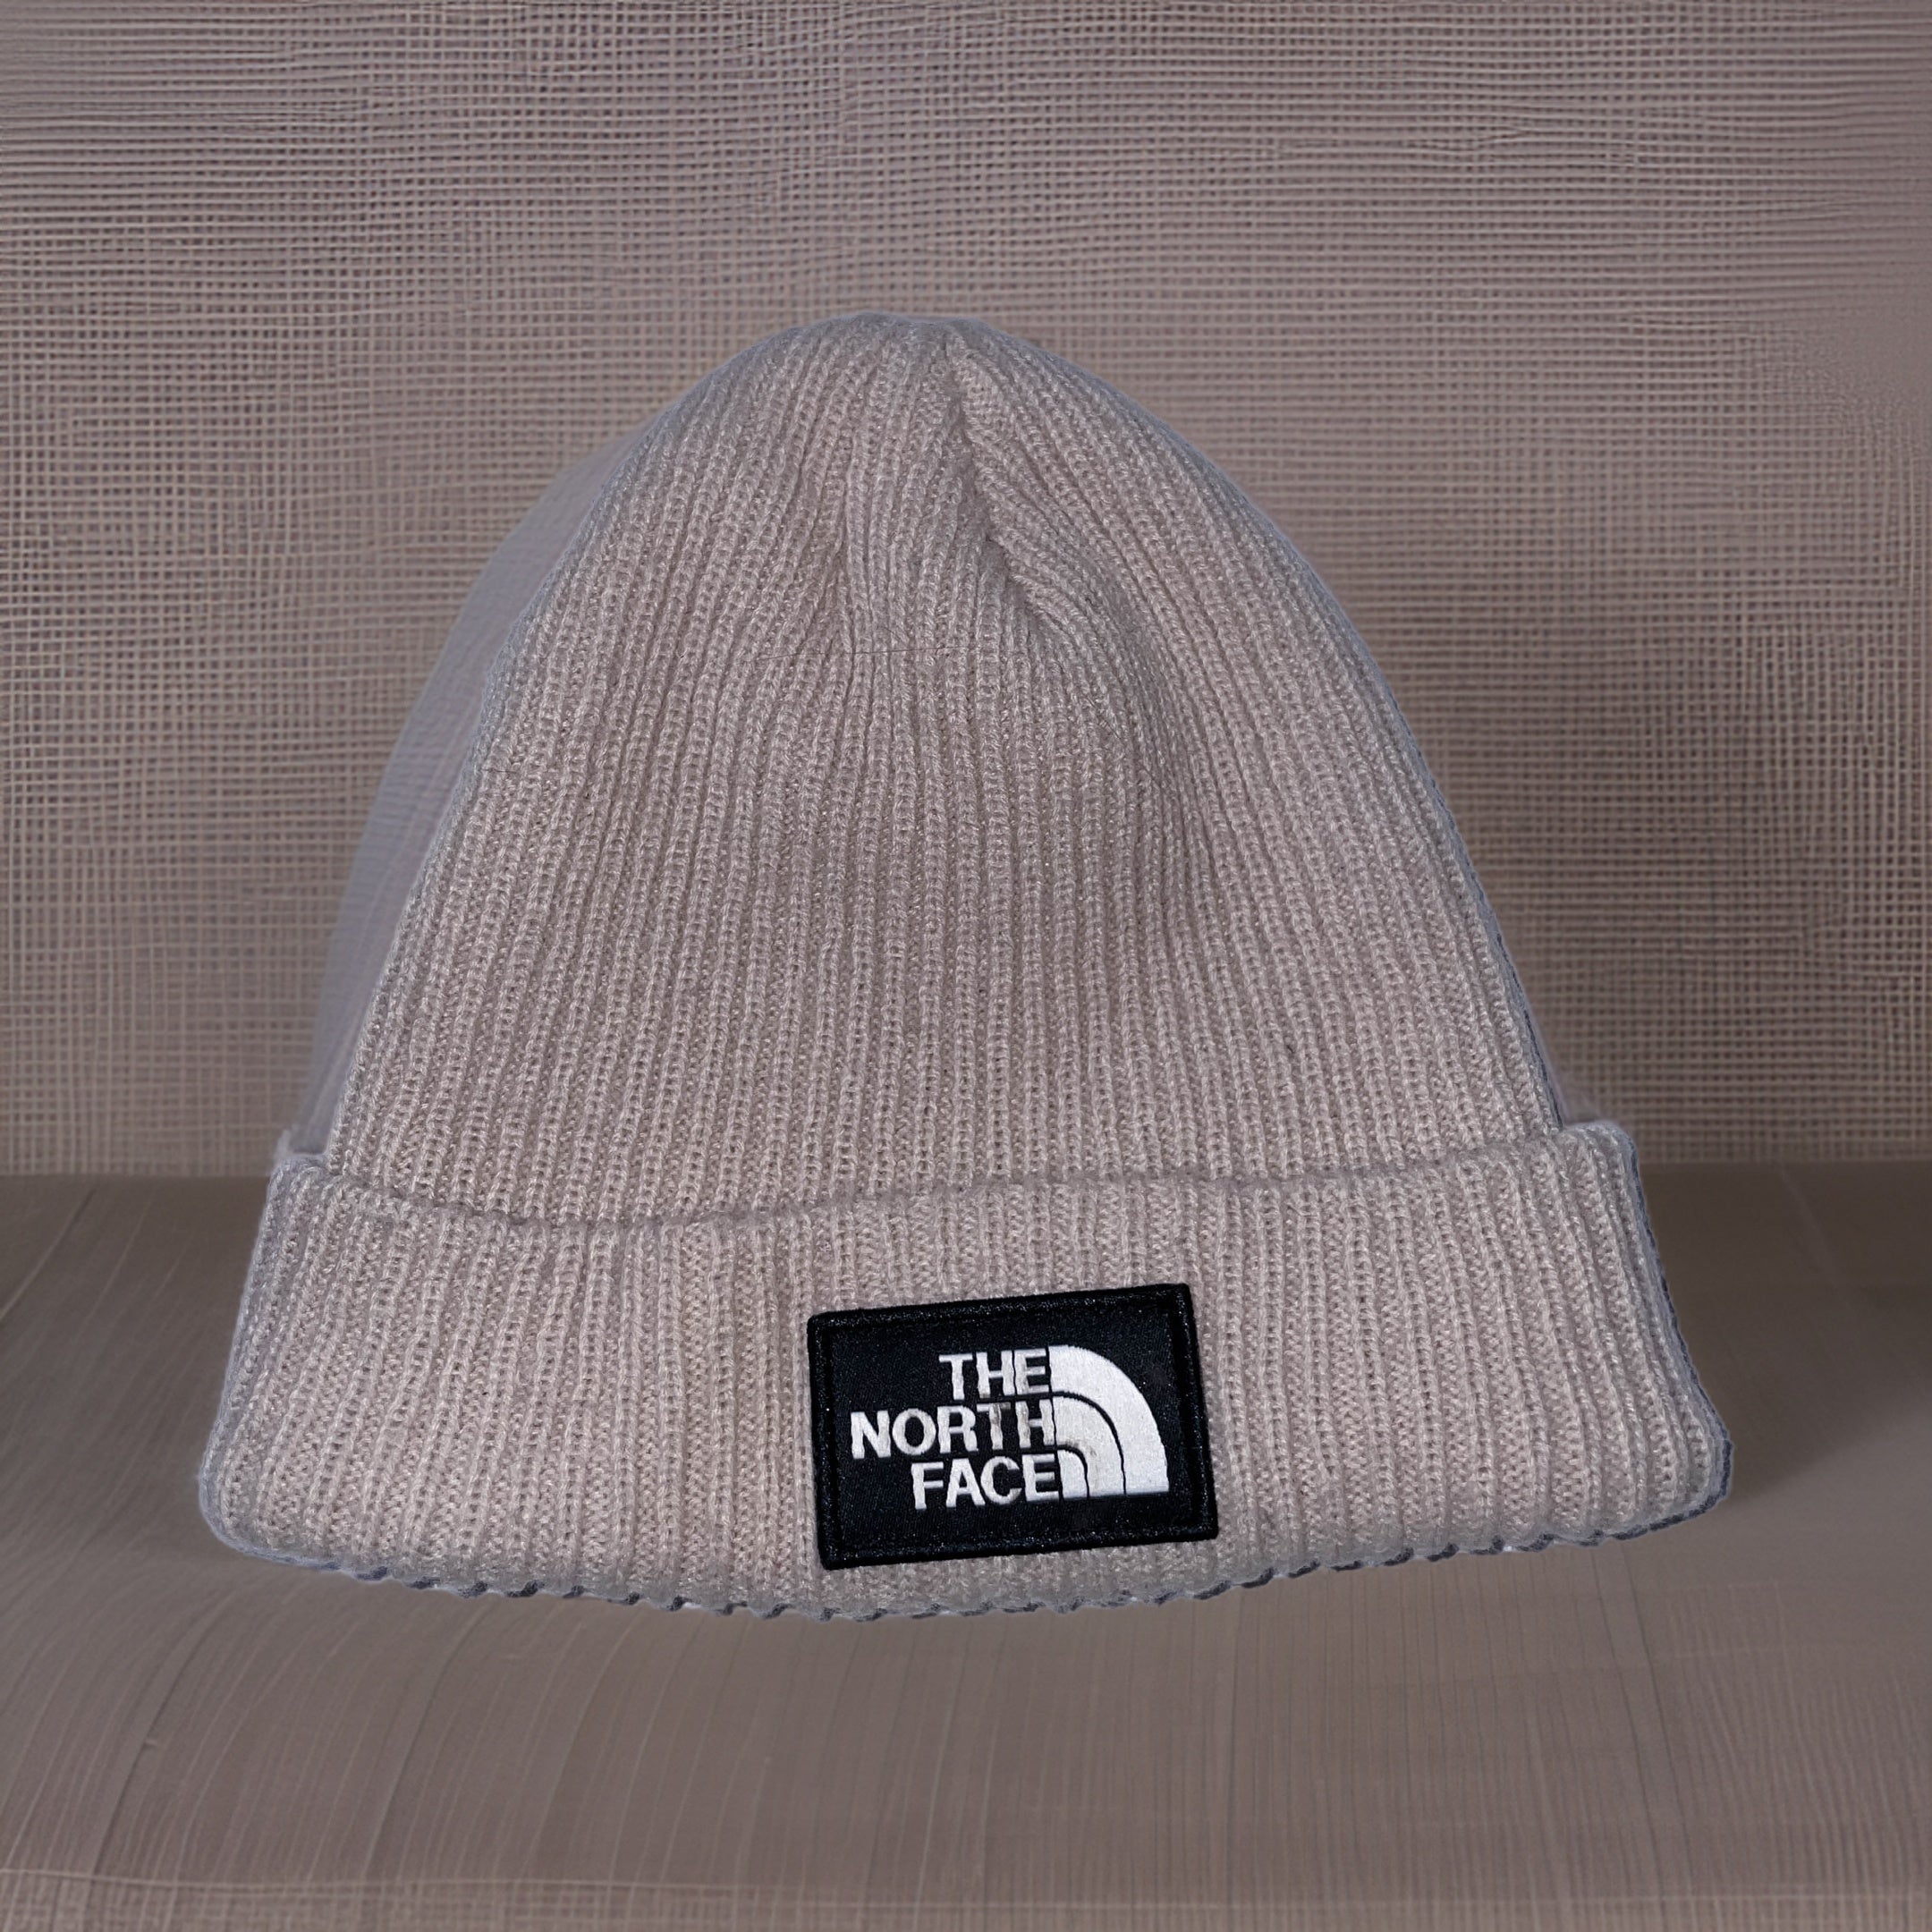 Vintage The north face acrylic cream beanie hat